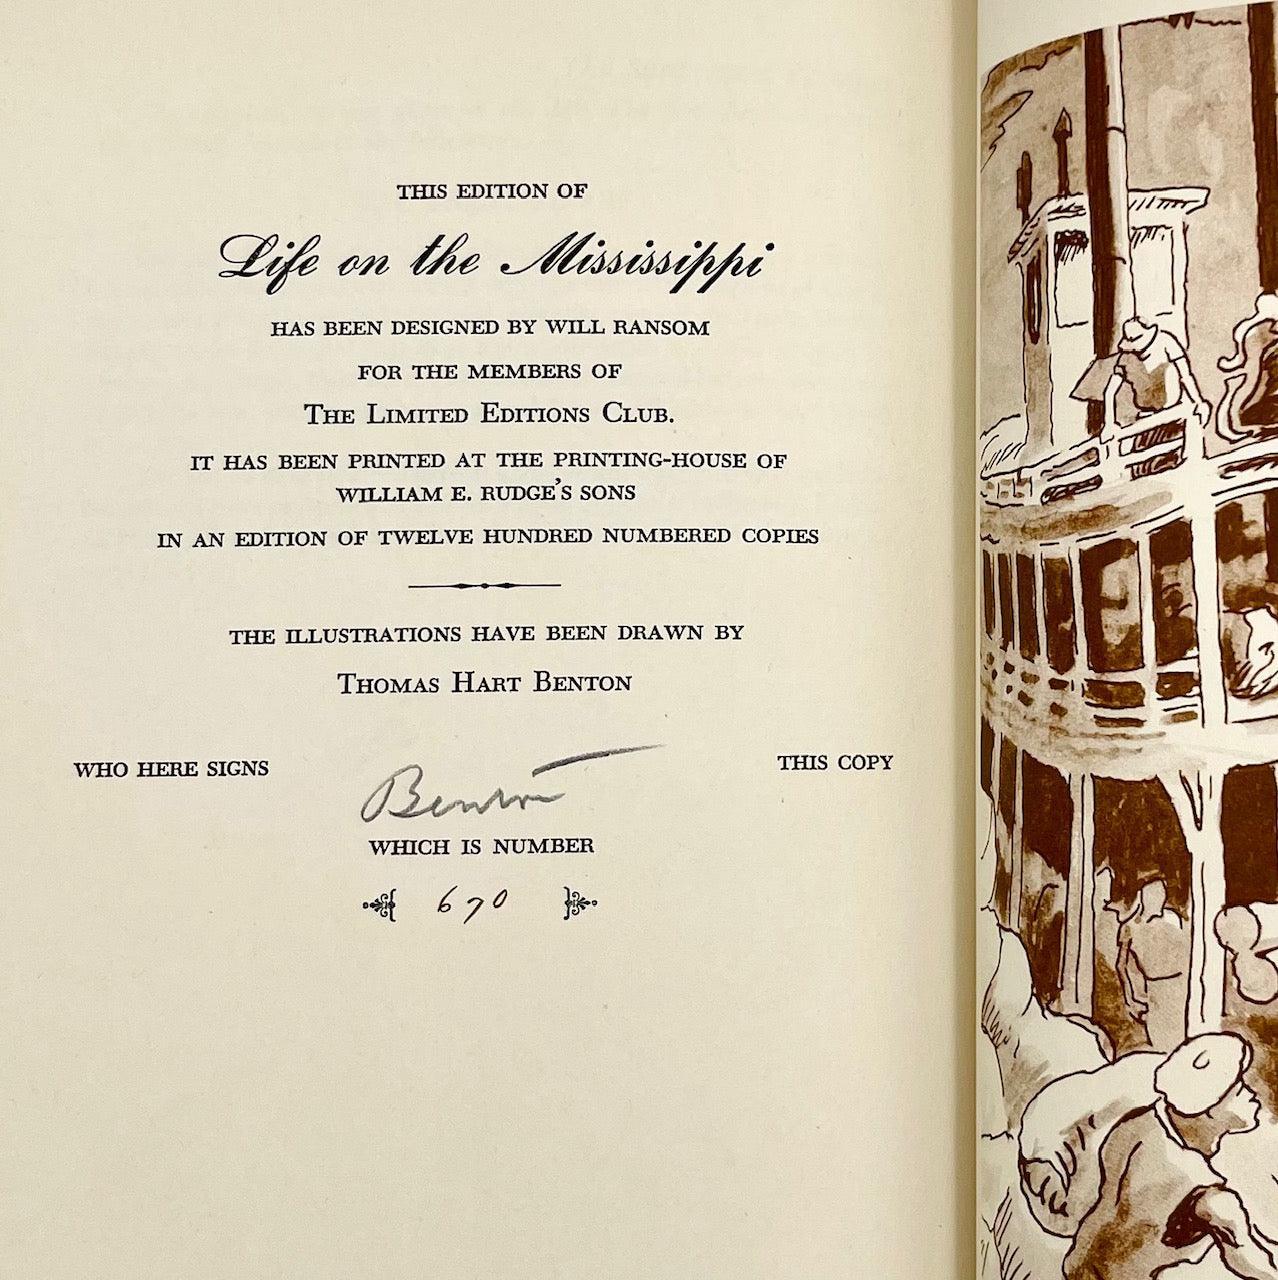 Life on the Mississippi (illustrated and signed by Thomas Hart Benton) - Grinning Cat Books - LITERATURE - AMERICAN LITERATURE